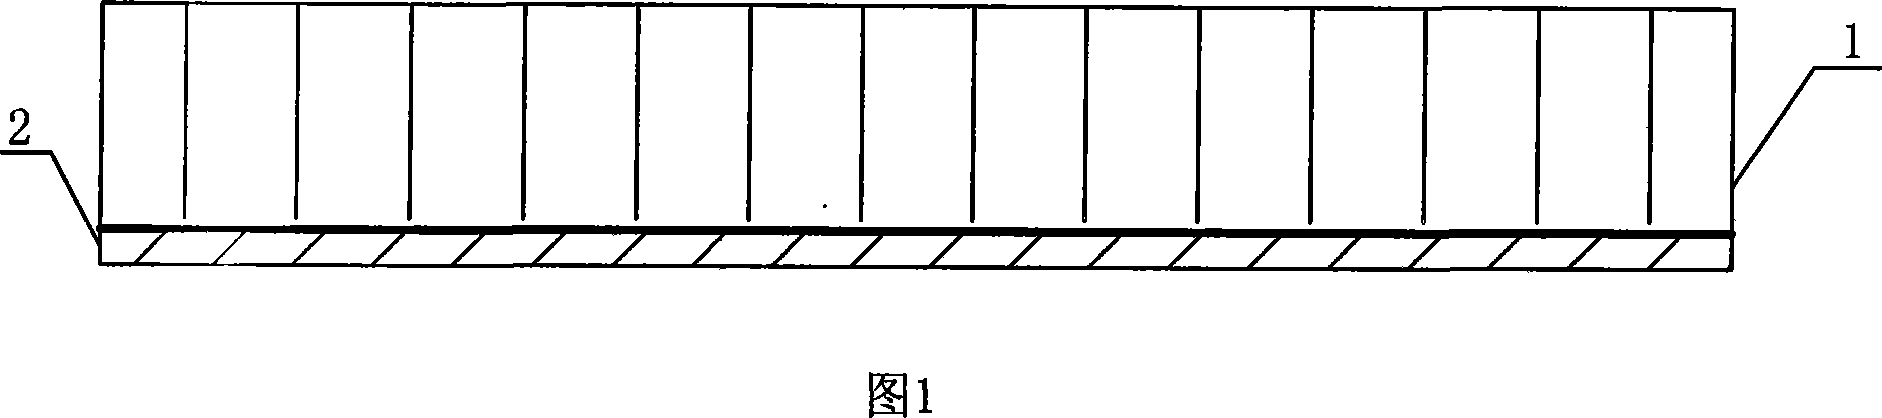 Honeycomb heater with infrared radiation function used on gas burner